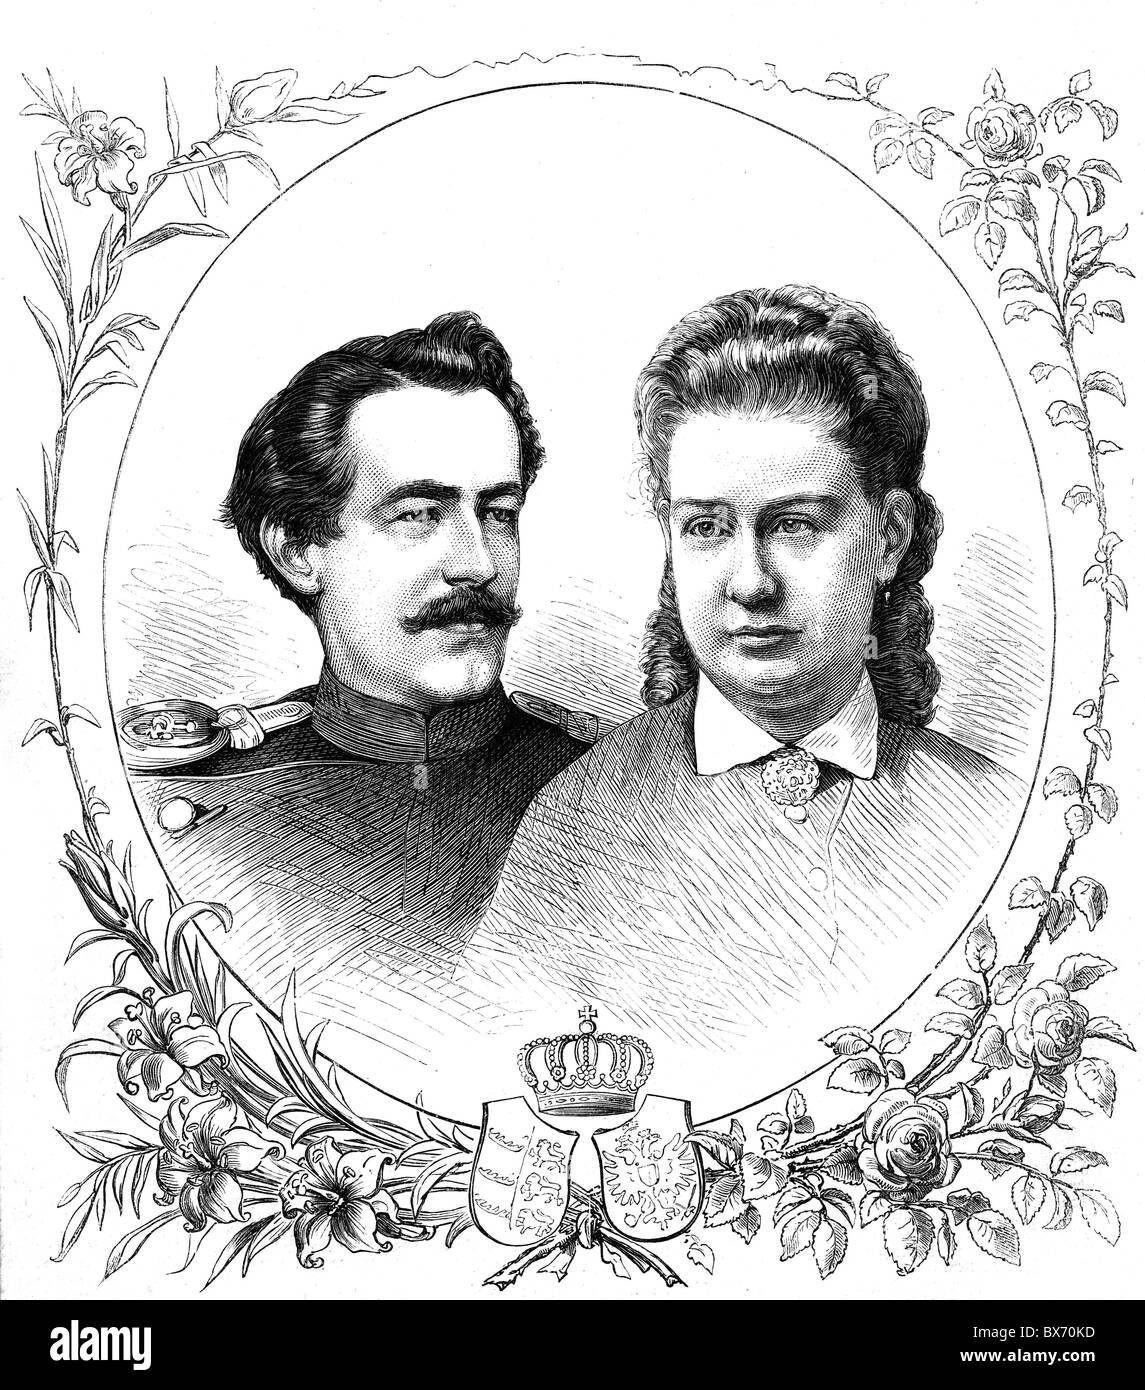 Wilhelm Eugen August, 20.8.1846 - 21.1.1877, Duke of Wuerttemberg, with his wife Vera, portrait, wood engraving, 19th century, , Stock Photo